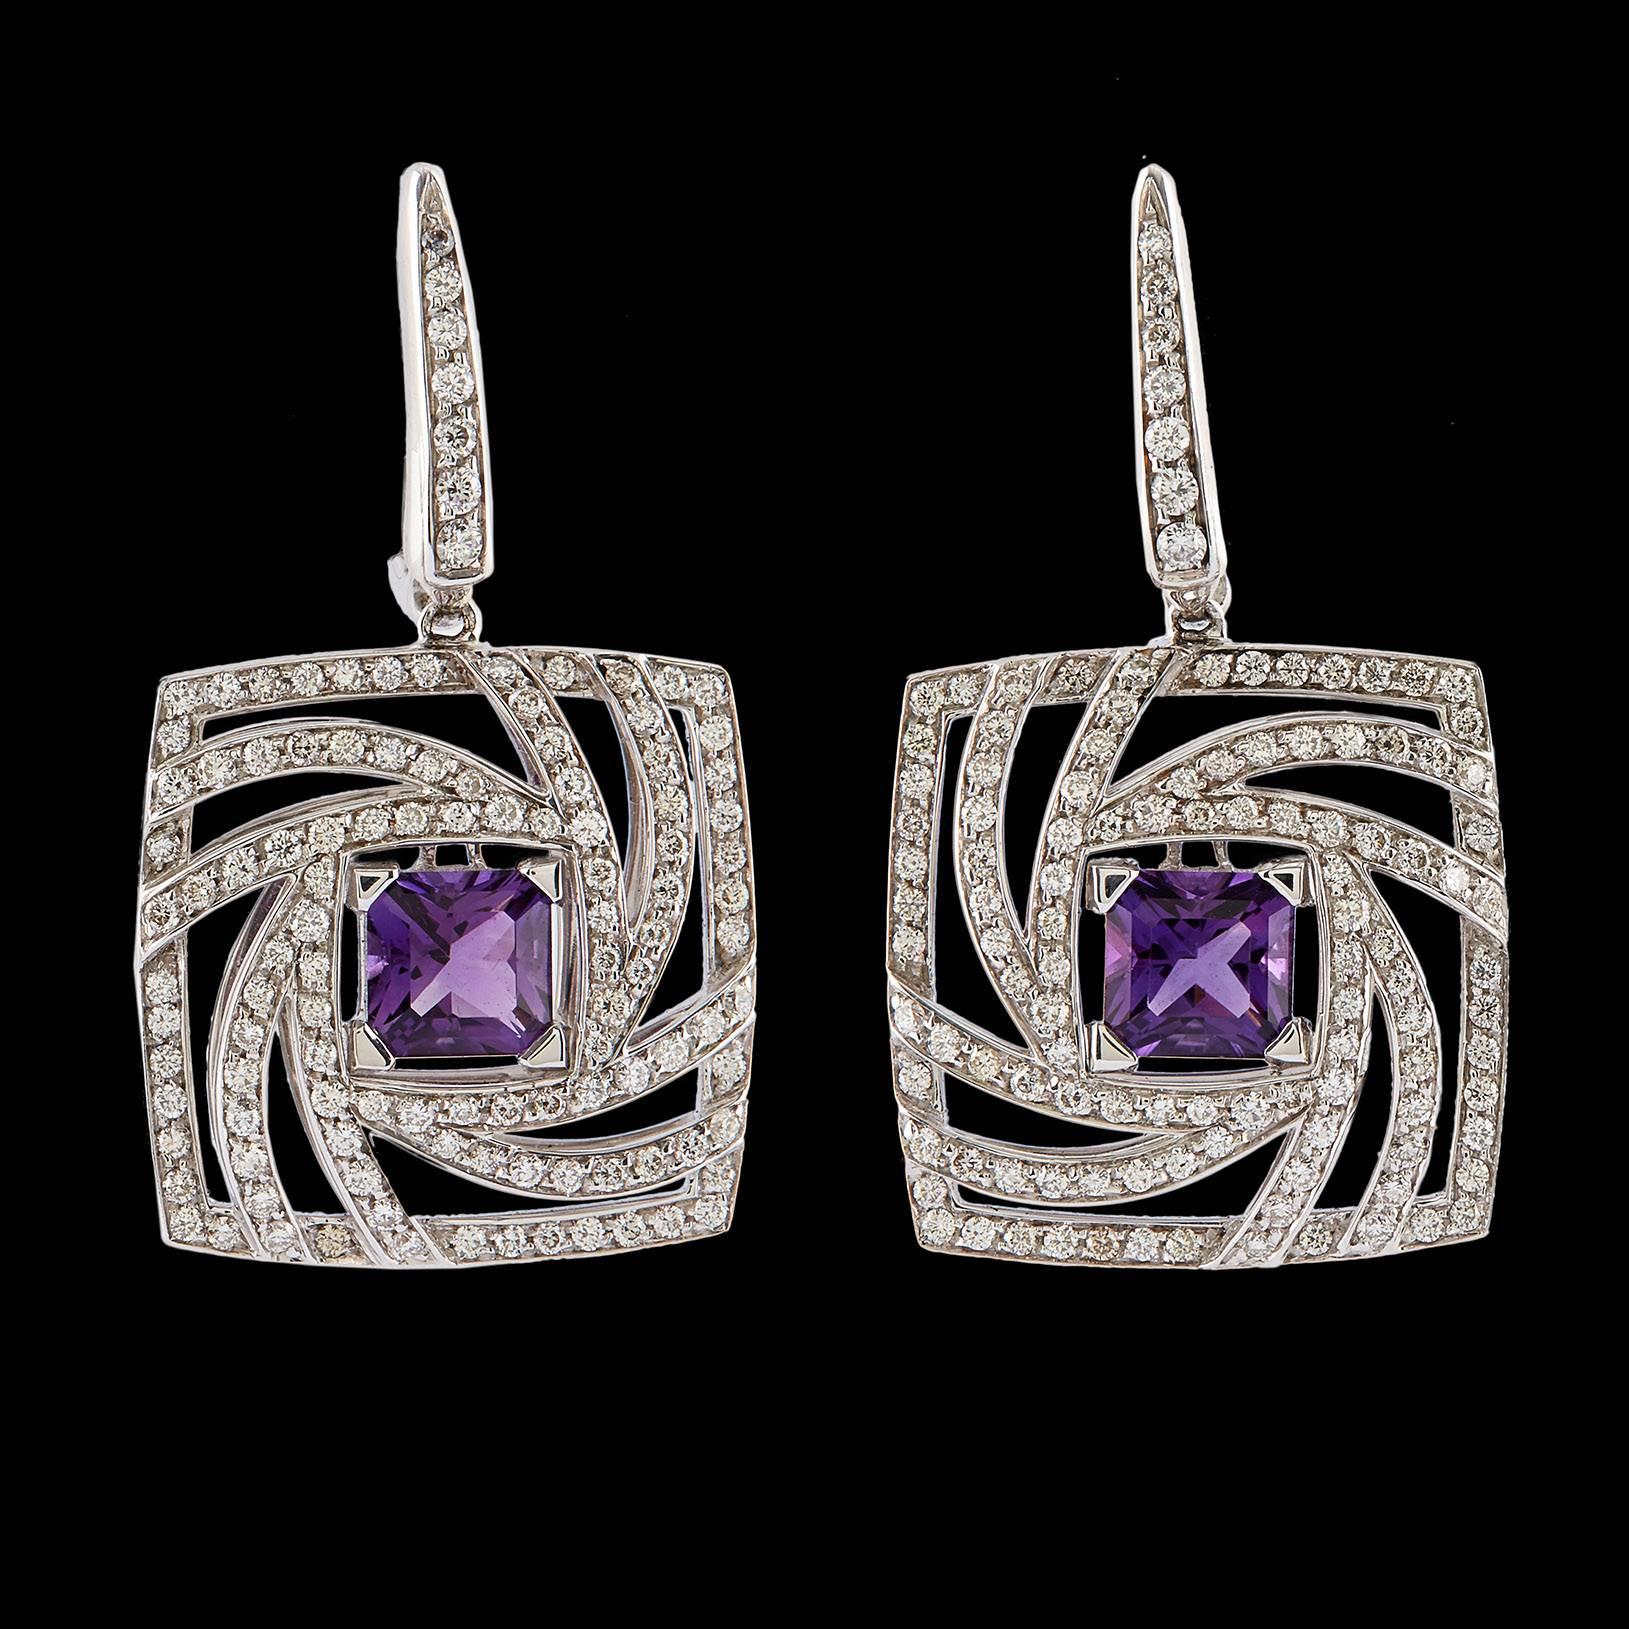 Luca Carati square shape amethyst and swirling diamond dangle earrings with a total carat weight of 2.33 for the amethyst and 1.73 carat total diamond weight.  The diamonds are in the F-G/VS quality range. These statement earrings measure 21.5mm